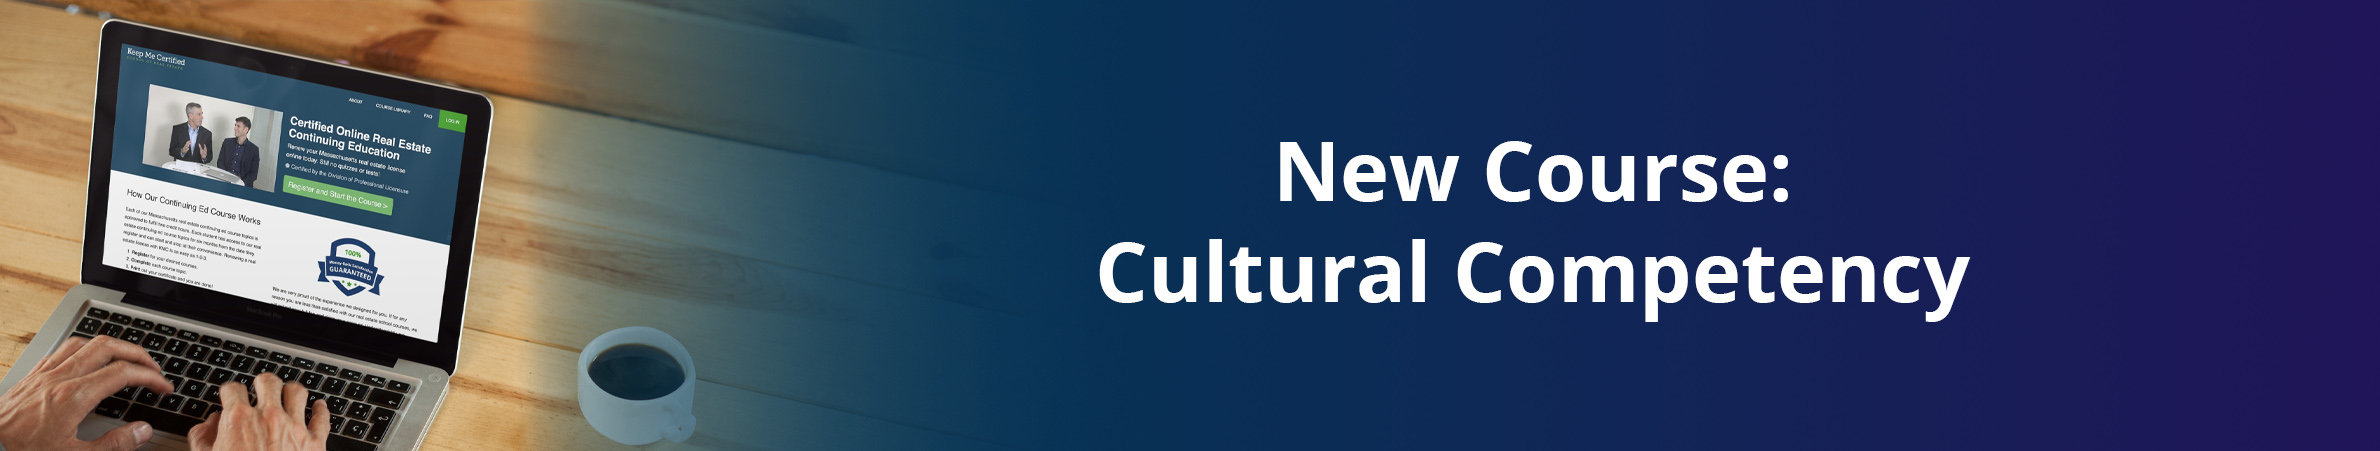 Cultural Competency Course